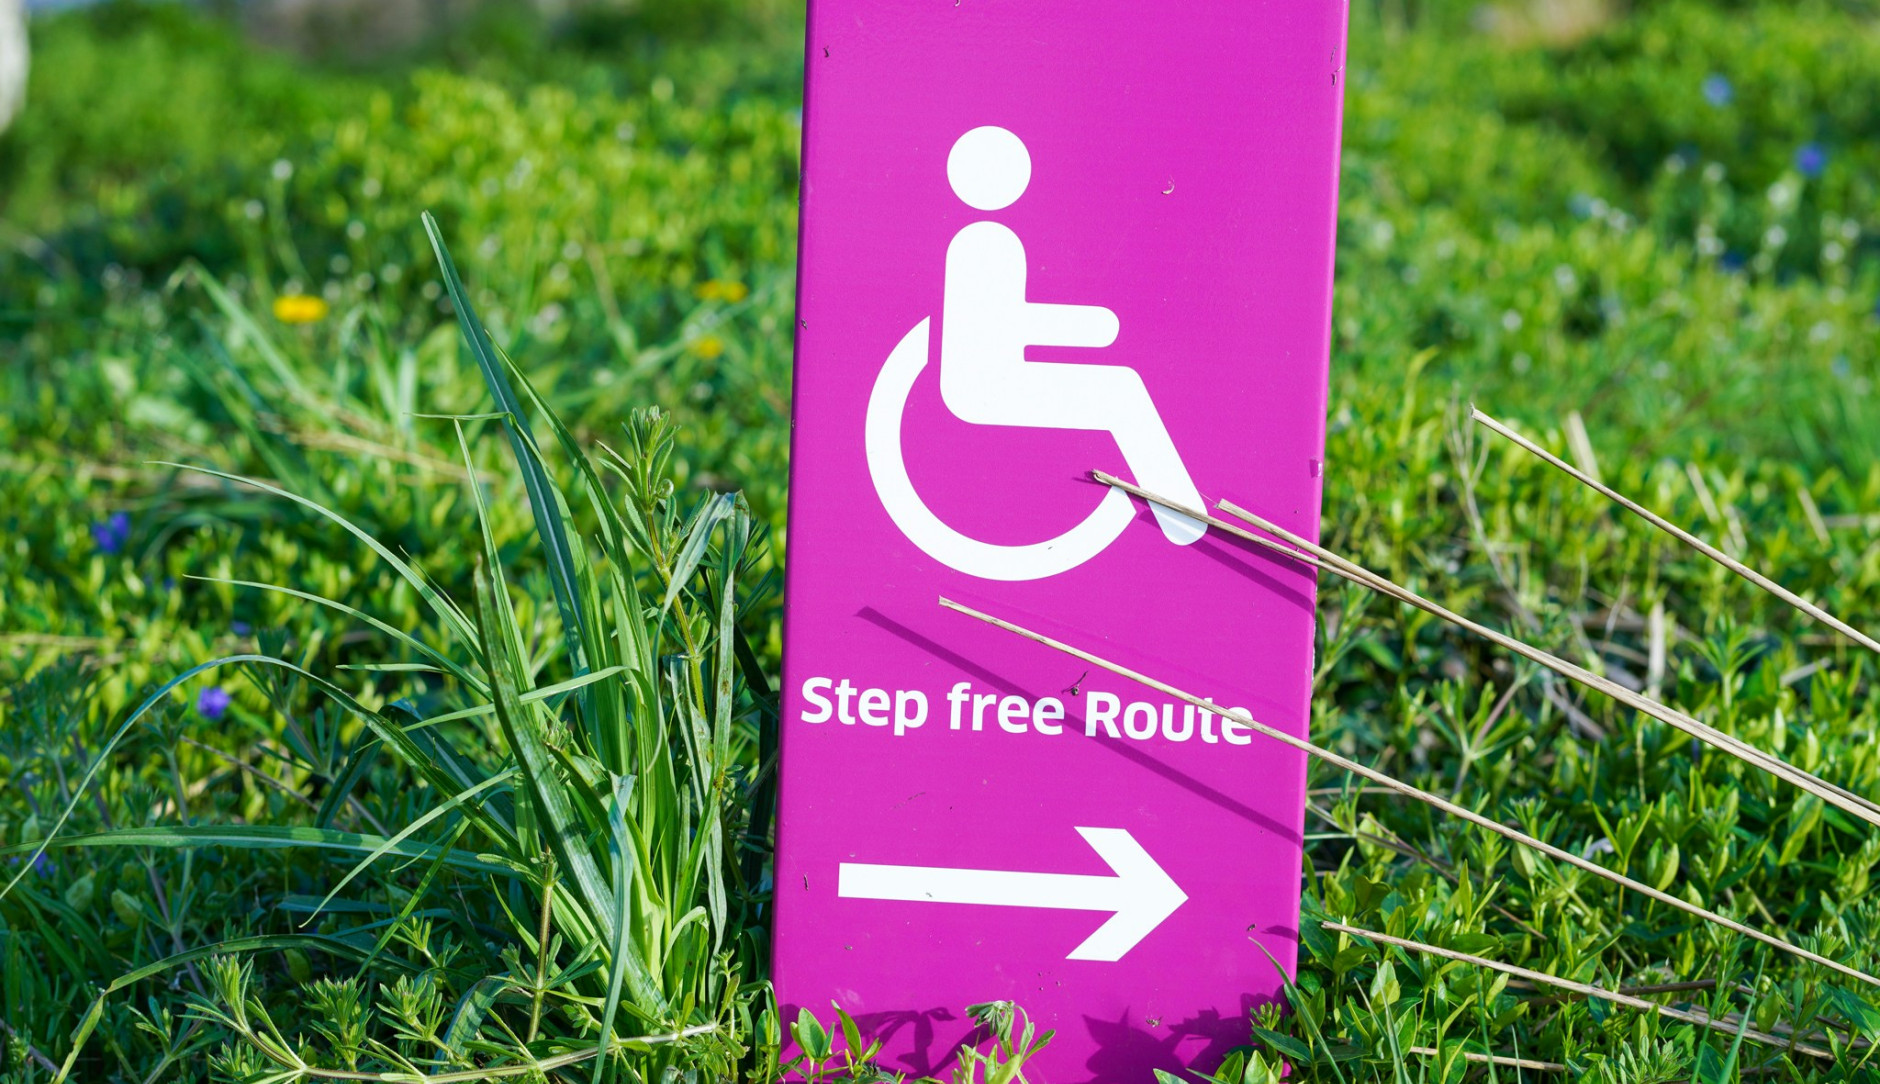 A sign that reads, 'Step free Route', with a symbol of a person in a wheelchair.